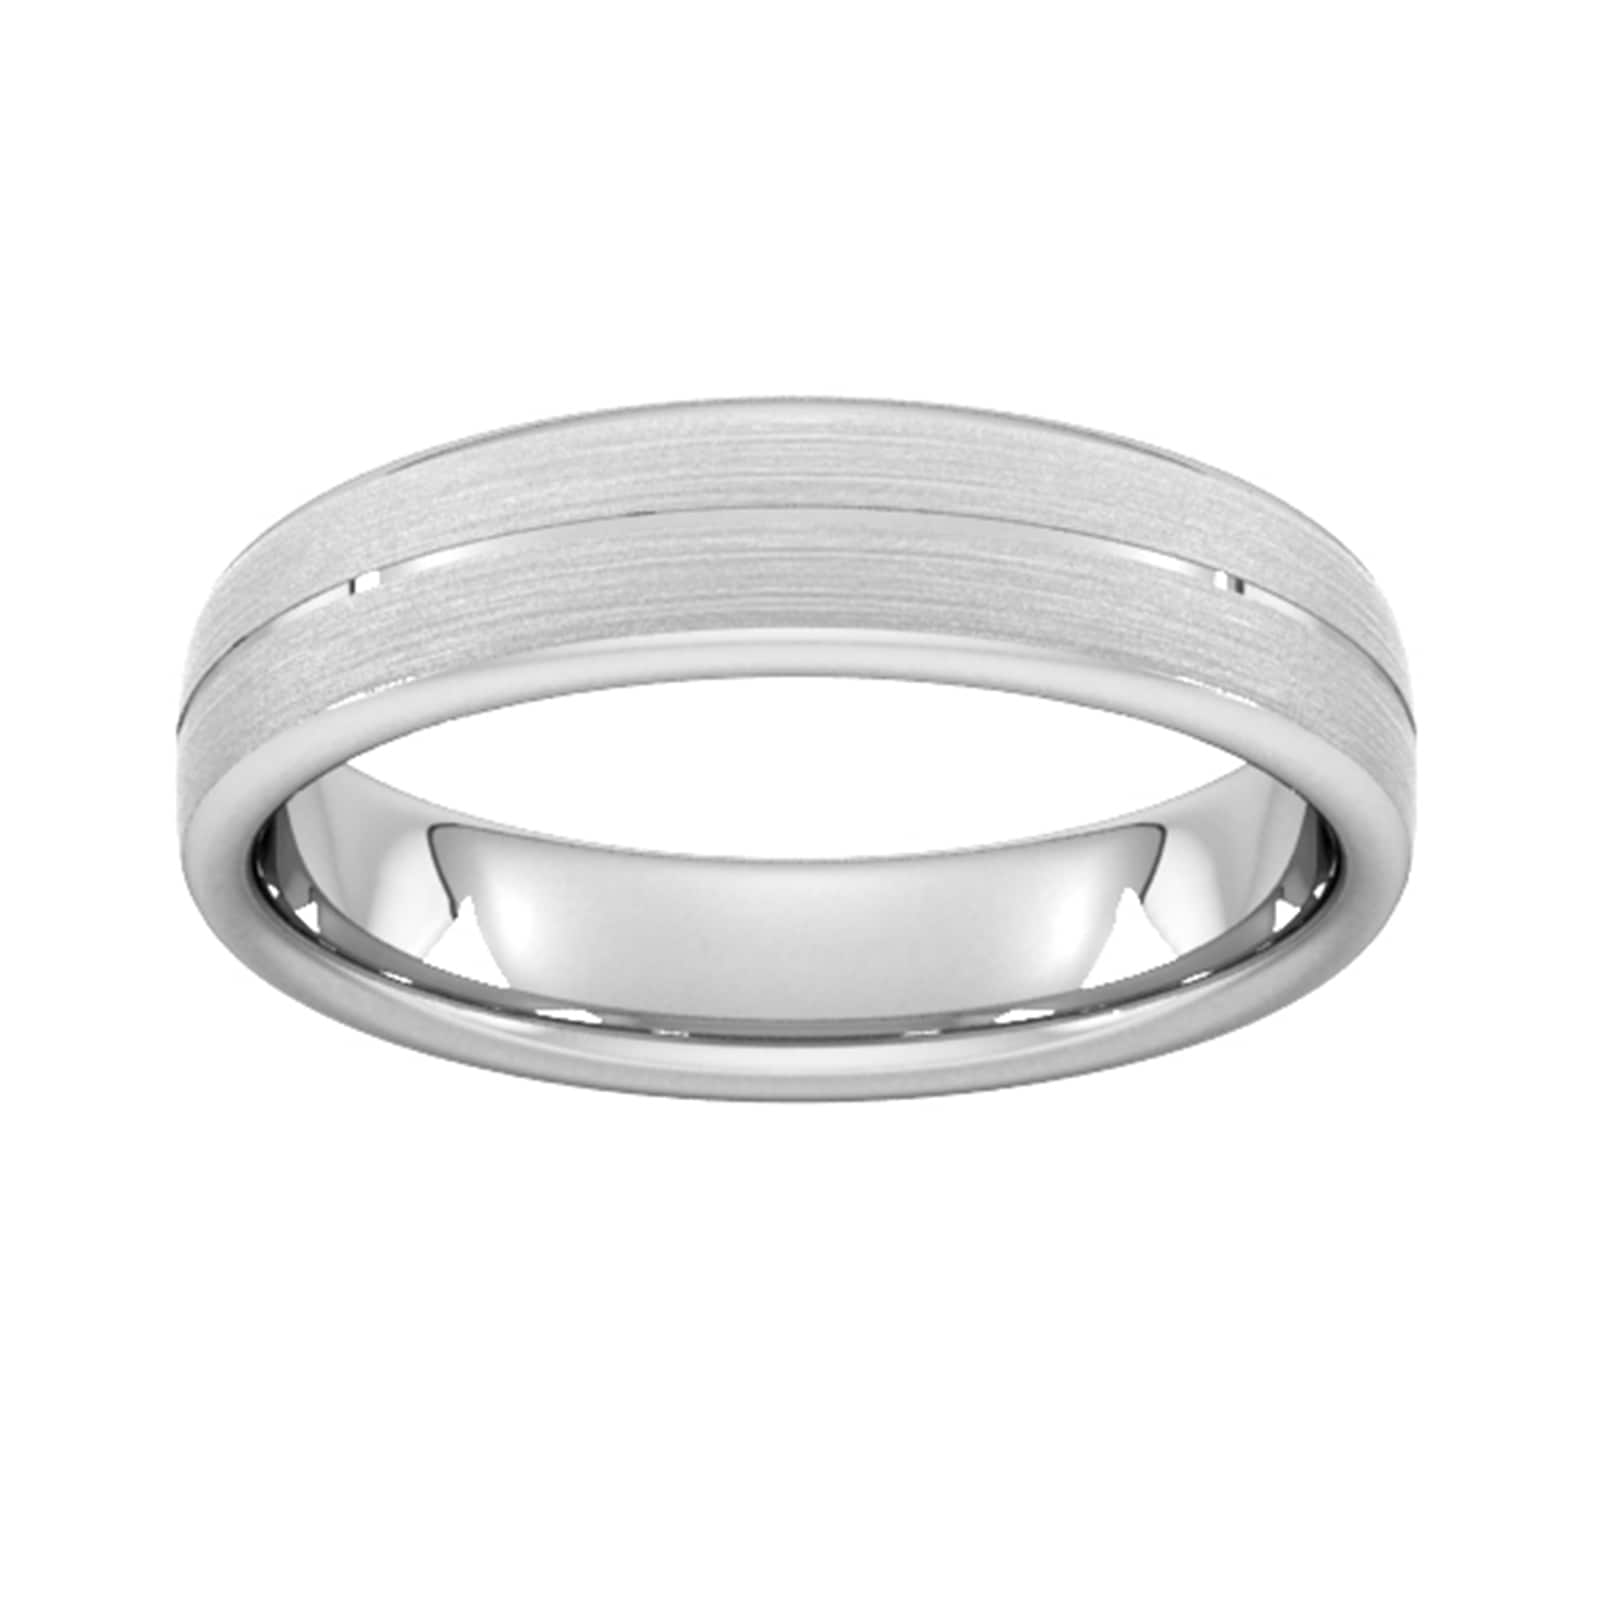 5mm D Shape Standard Centre Groove With Chamfered Edge Wedding Ring In 950 Palladium - Ring Size I